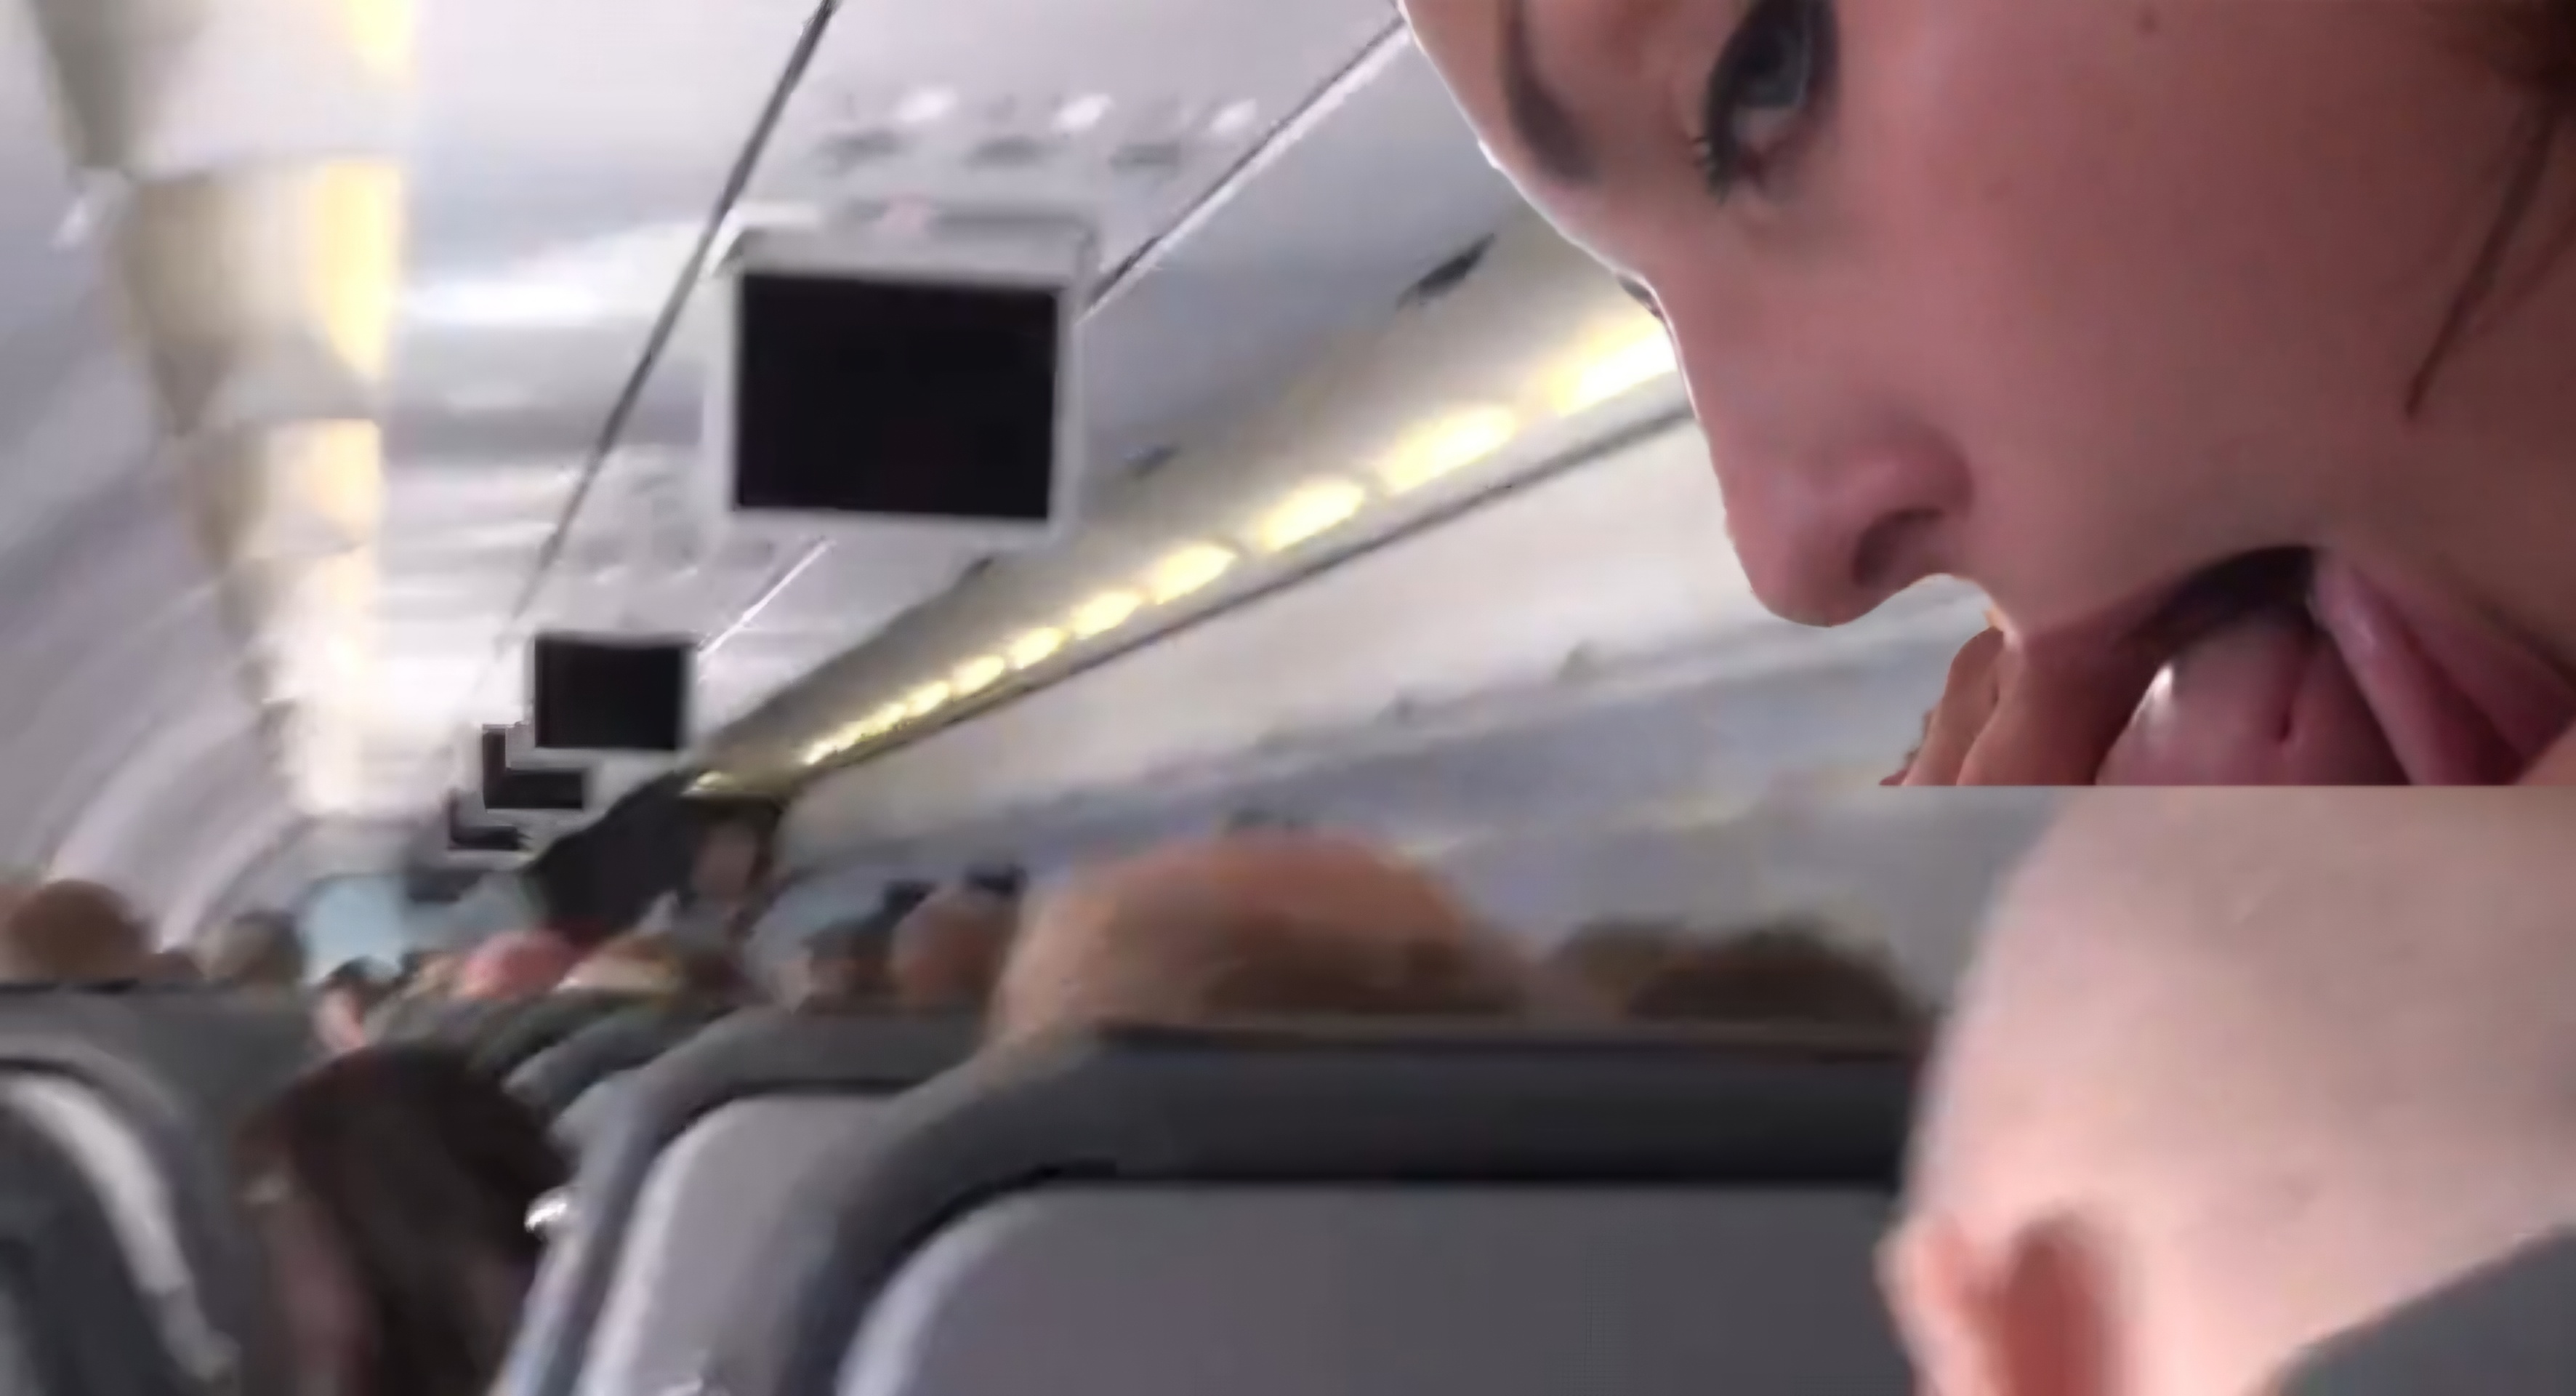 Blowjob in a plane - video 2